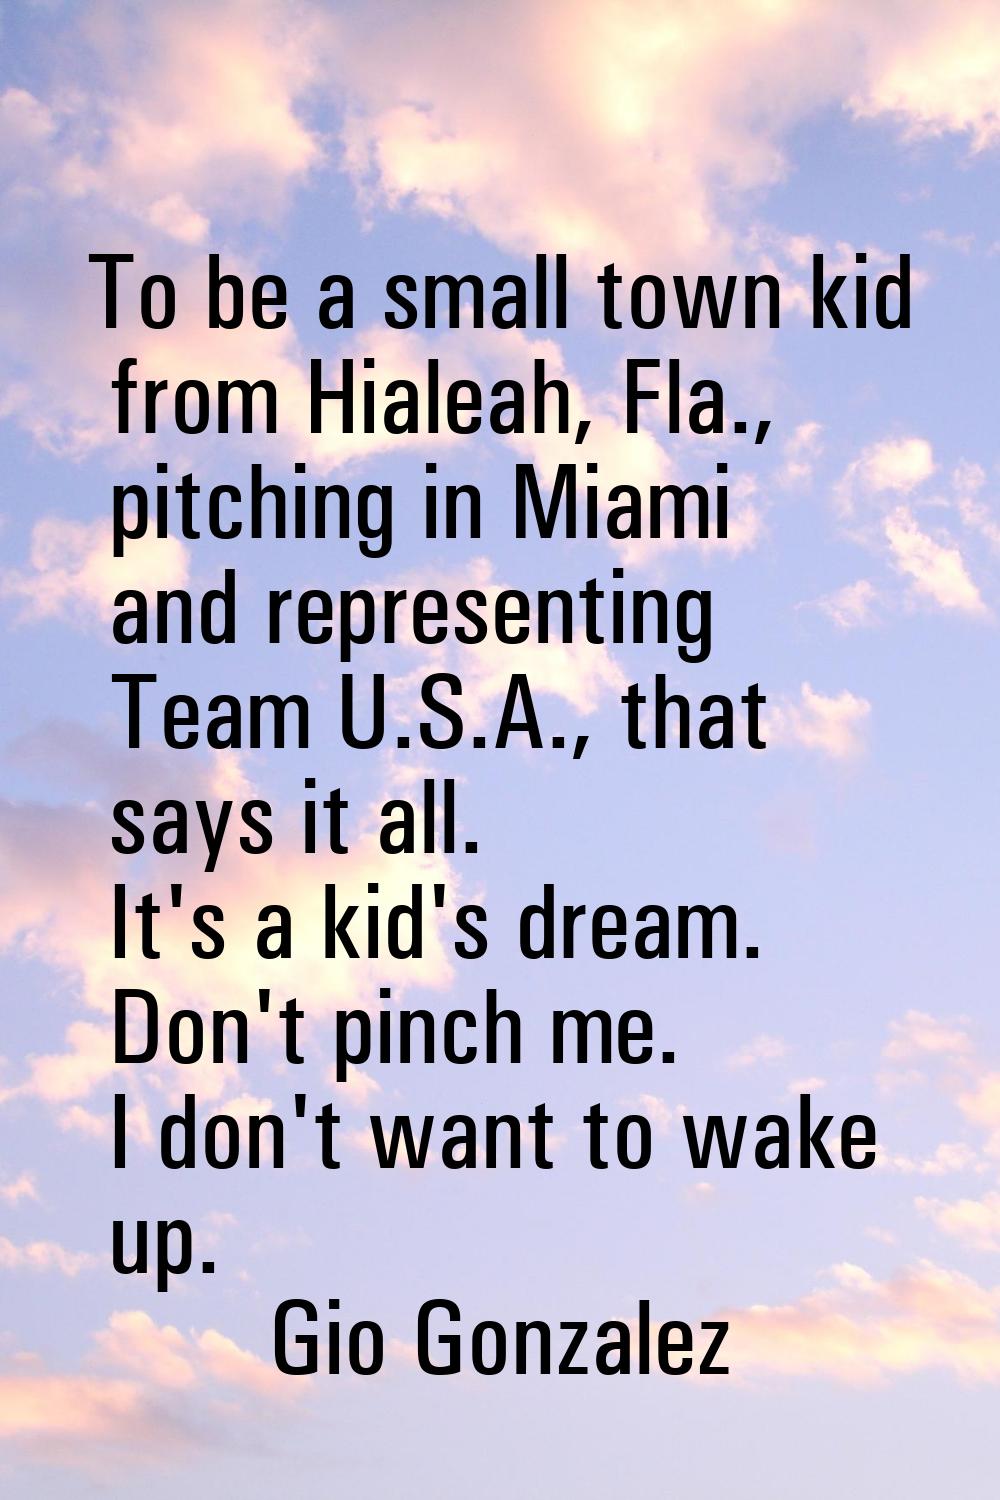 To be a small town kid from Hialeah, Fla., pitching in Miami and representing Team U.S.A., that say